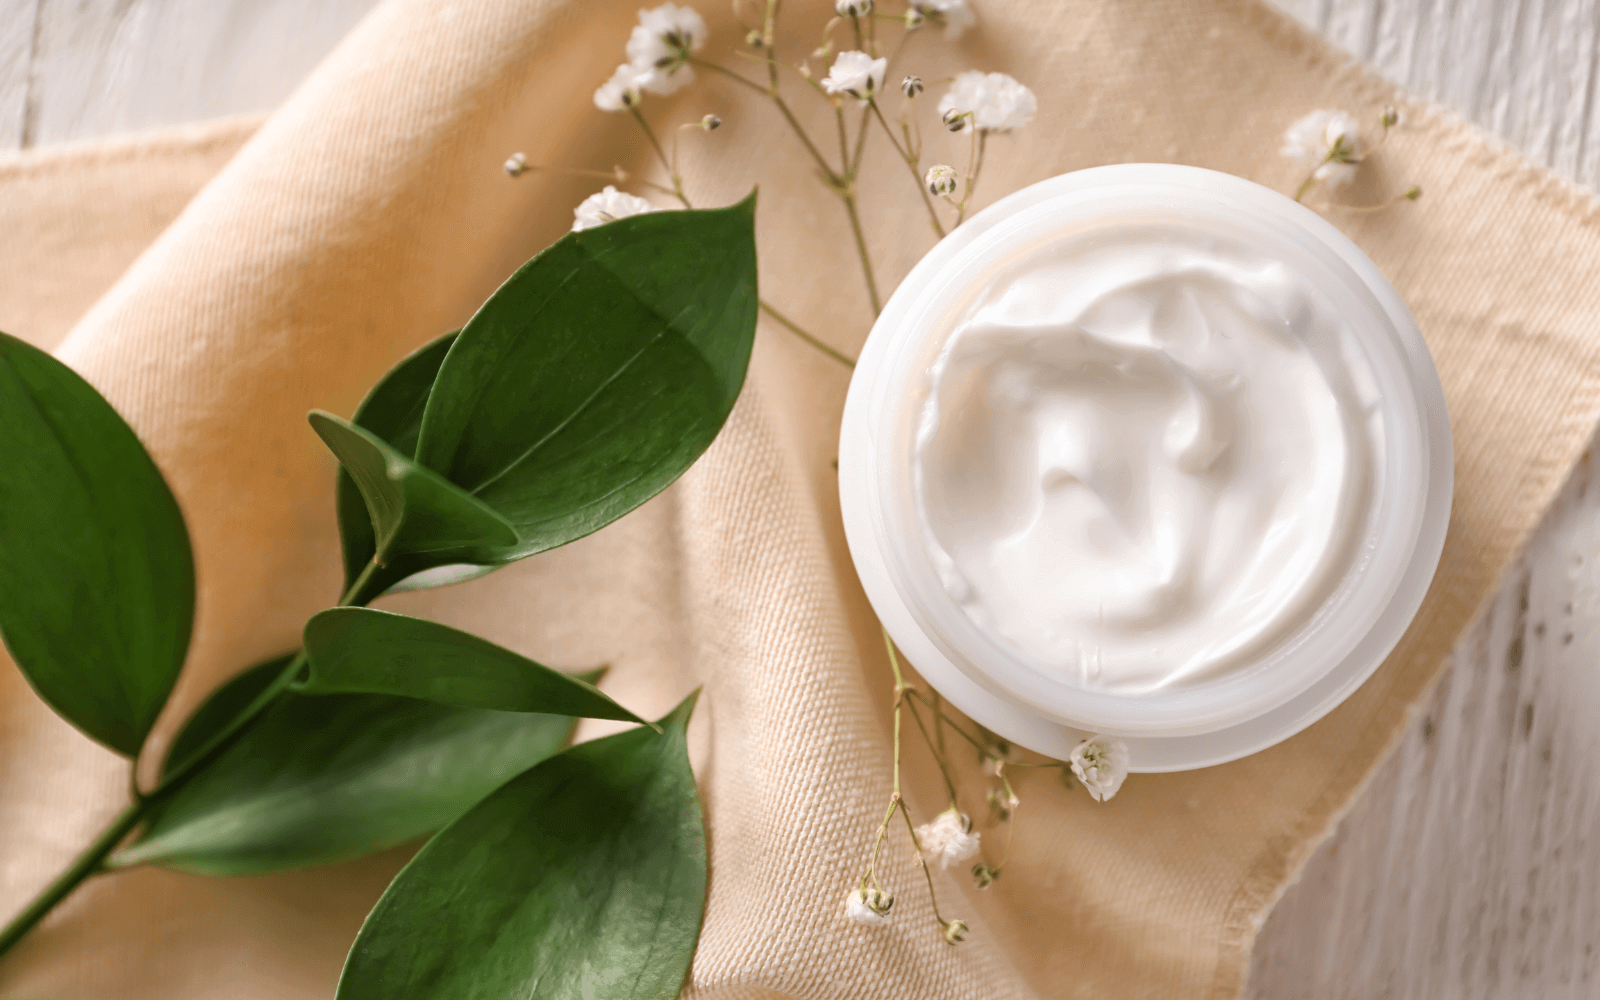 Top 5 Uses of Emulsified Wax For Skin - Is It Natural? – VedaOils